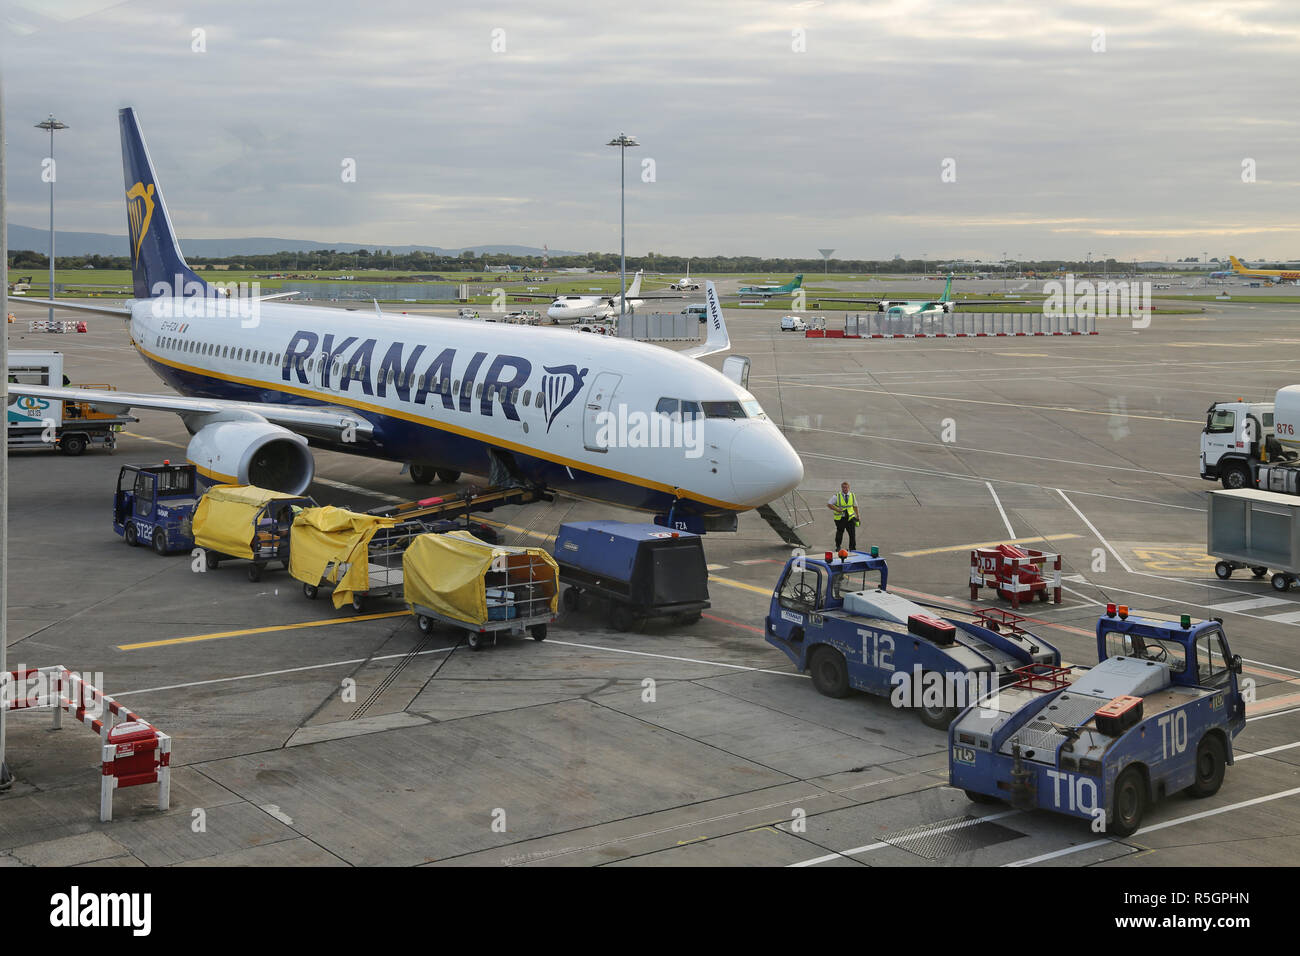 A Ryanair Boeing 737 parks on the apron at Dublin International Airport, Ireland, Terminal 2. Shows baggage loading and service vehicles. Stock Photo